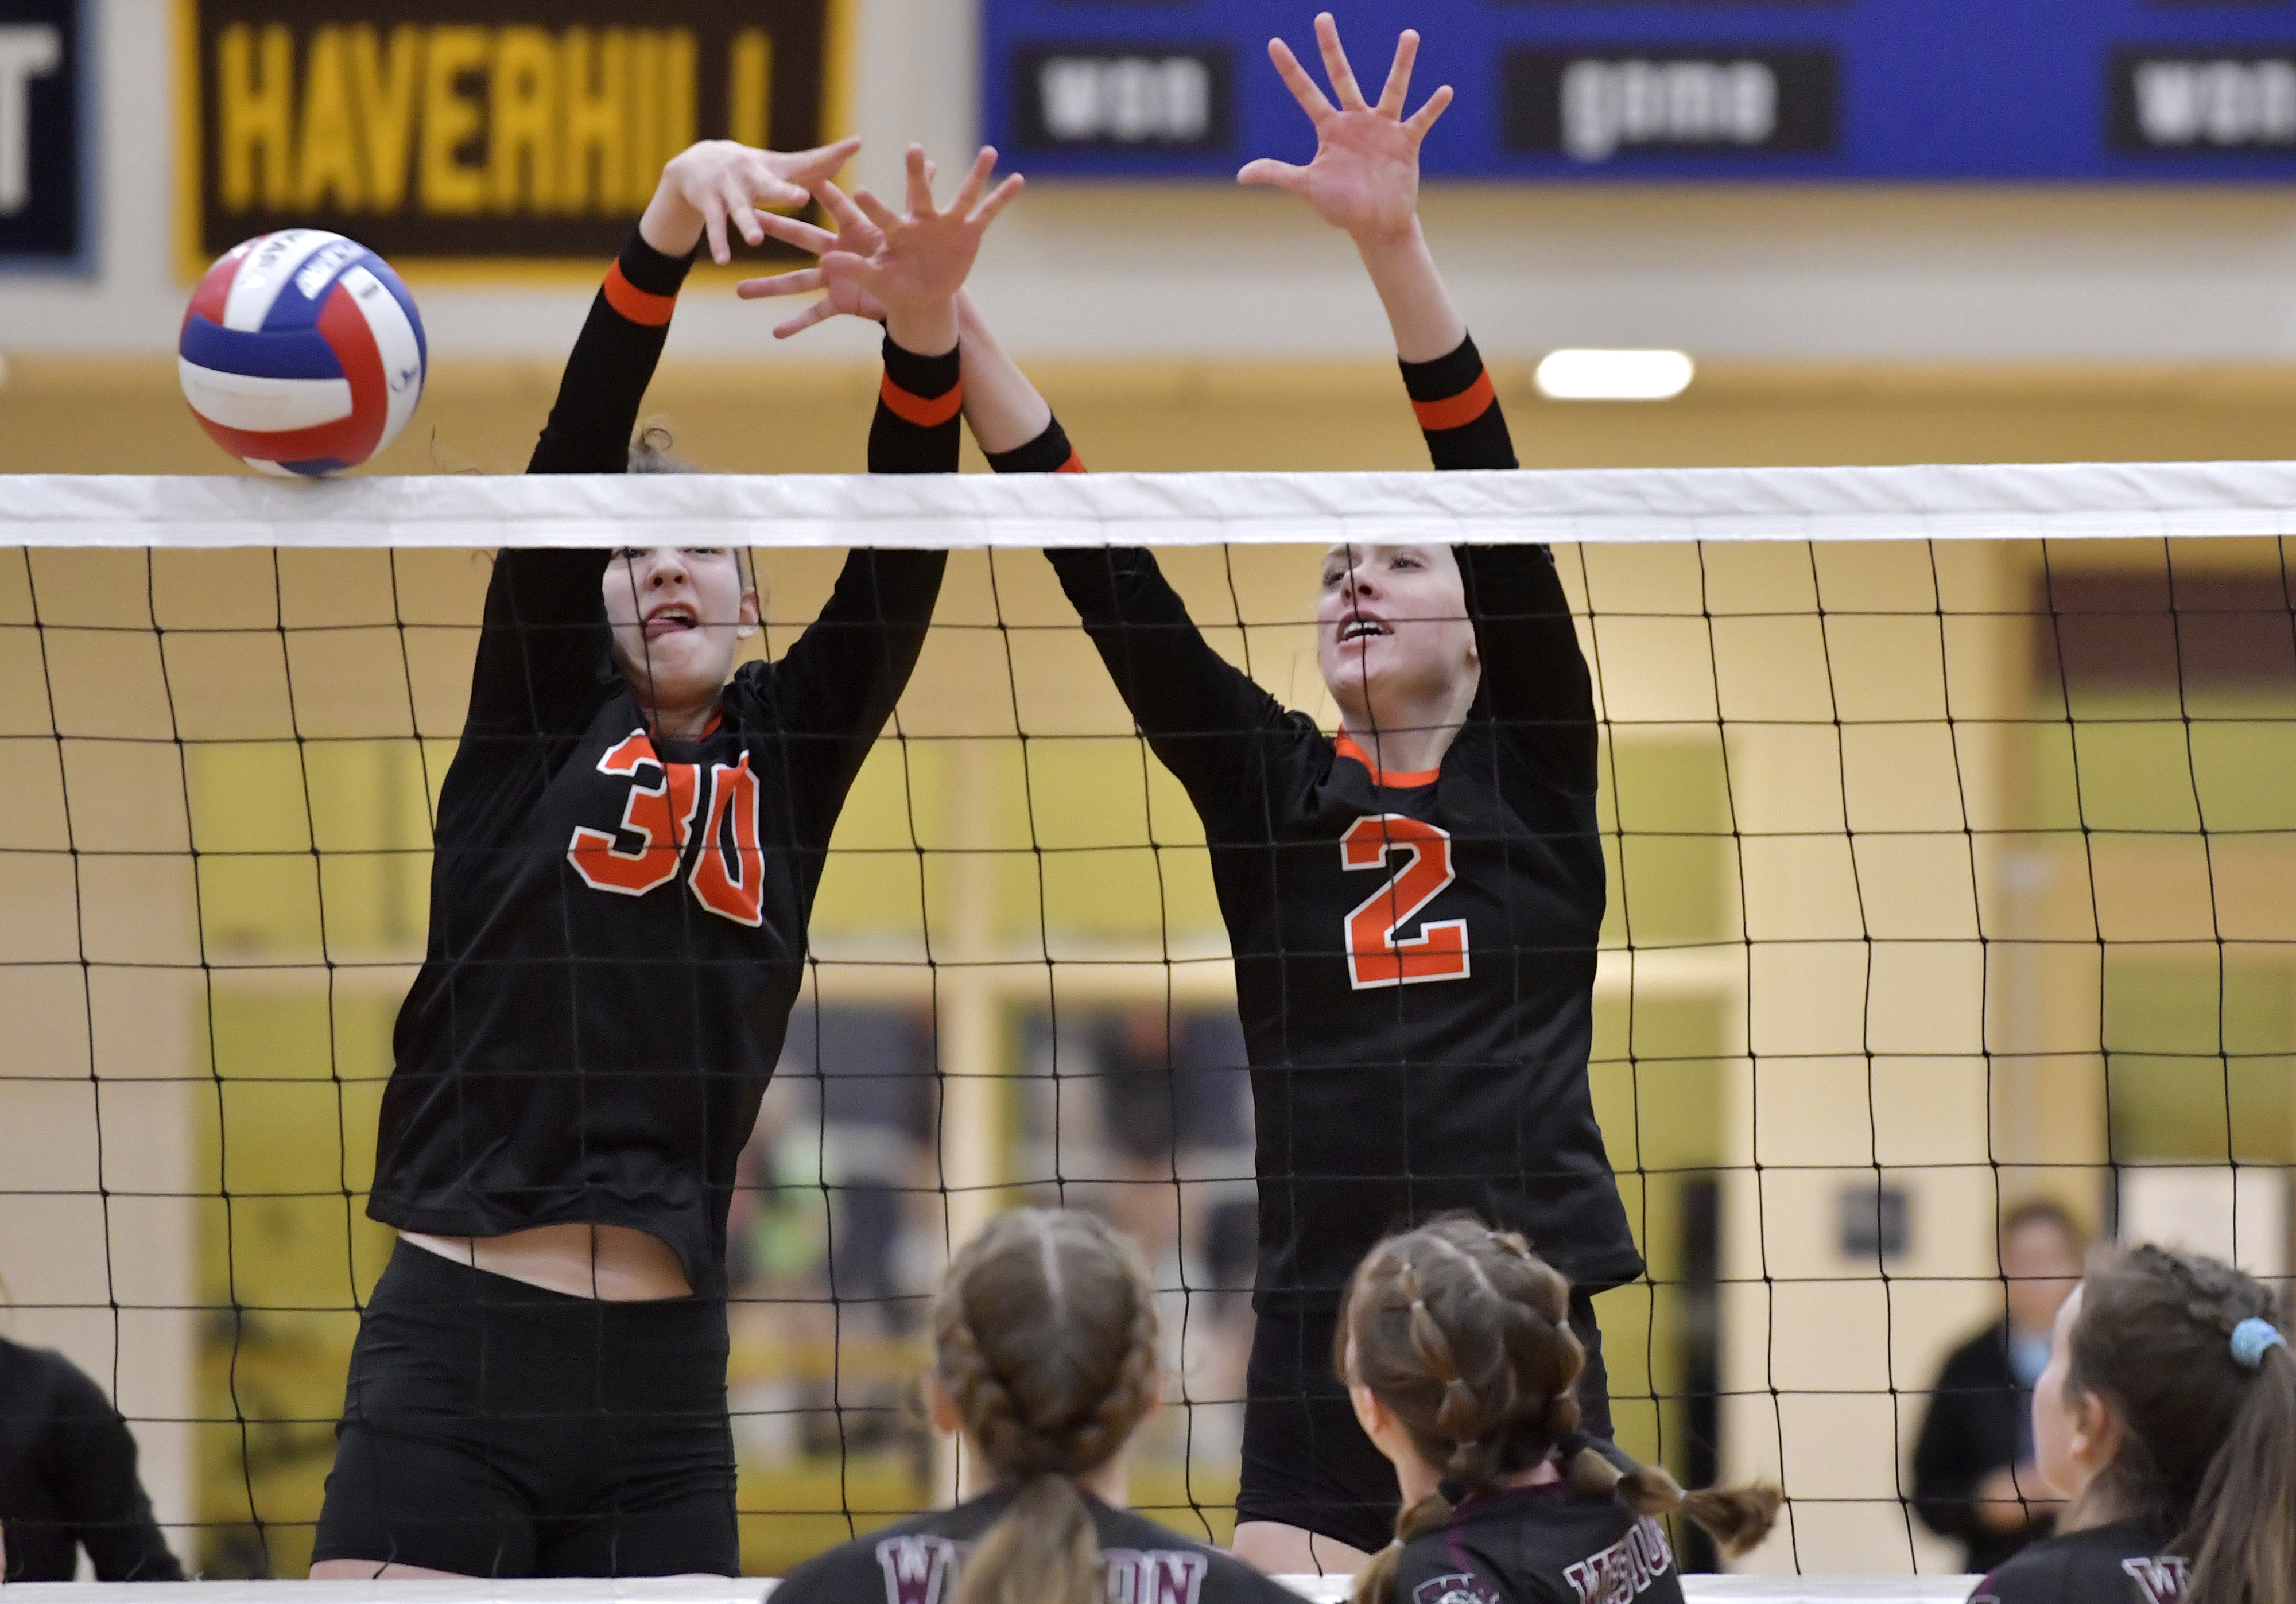 With every ounce of energy, Ipswich girls' volleyball nets three